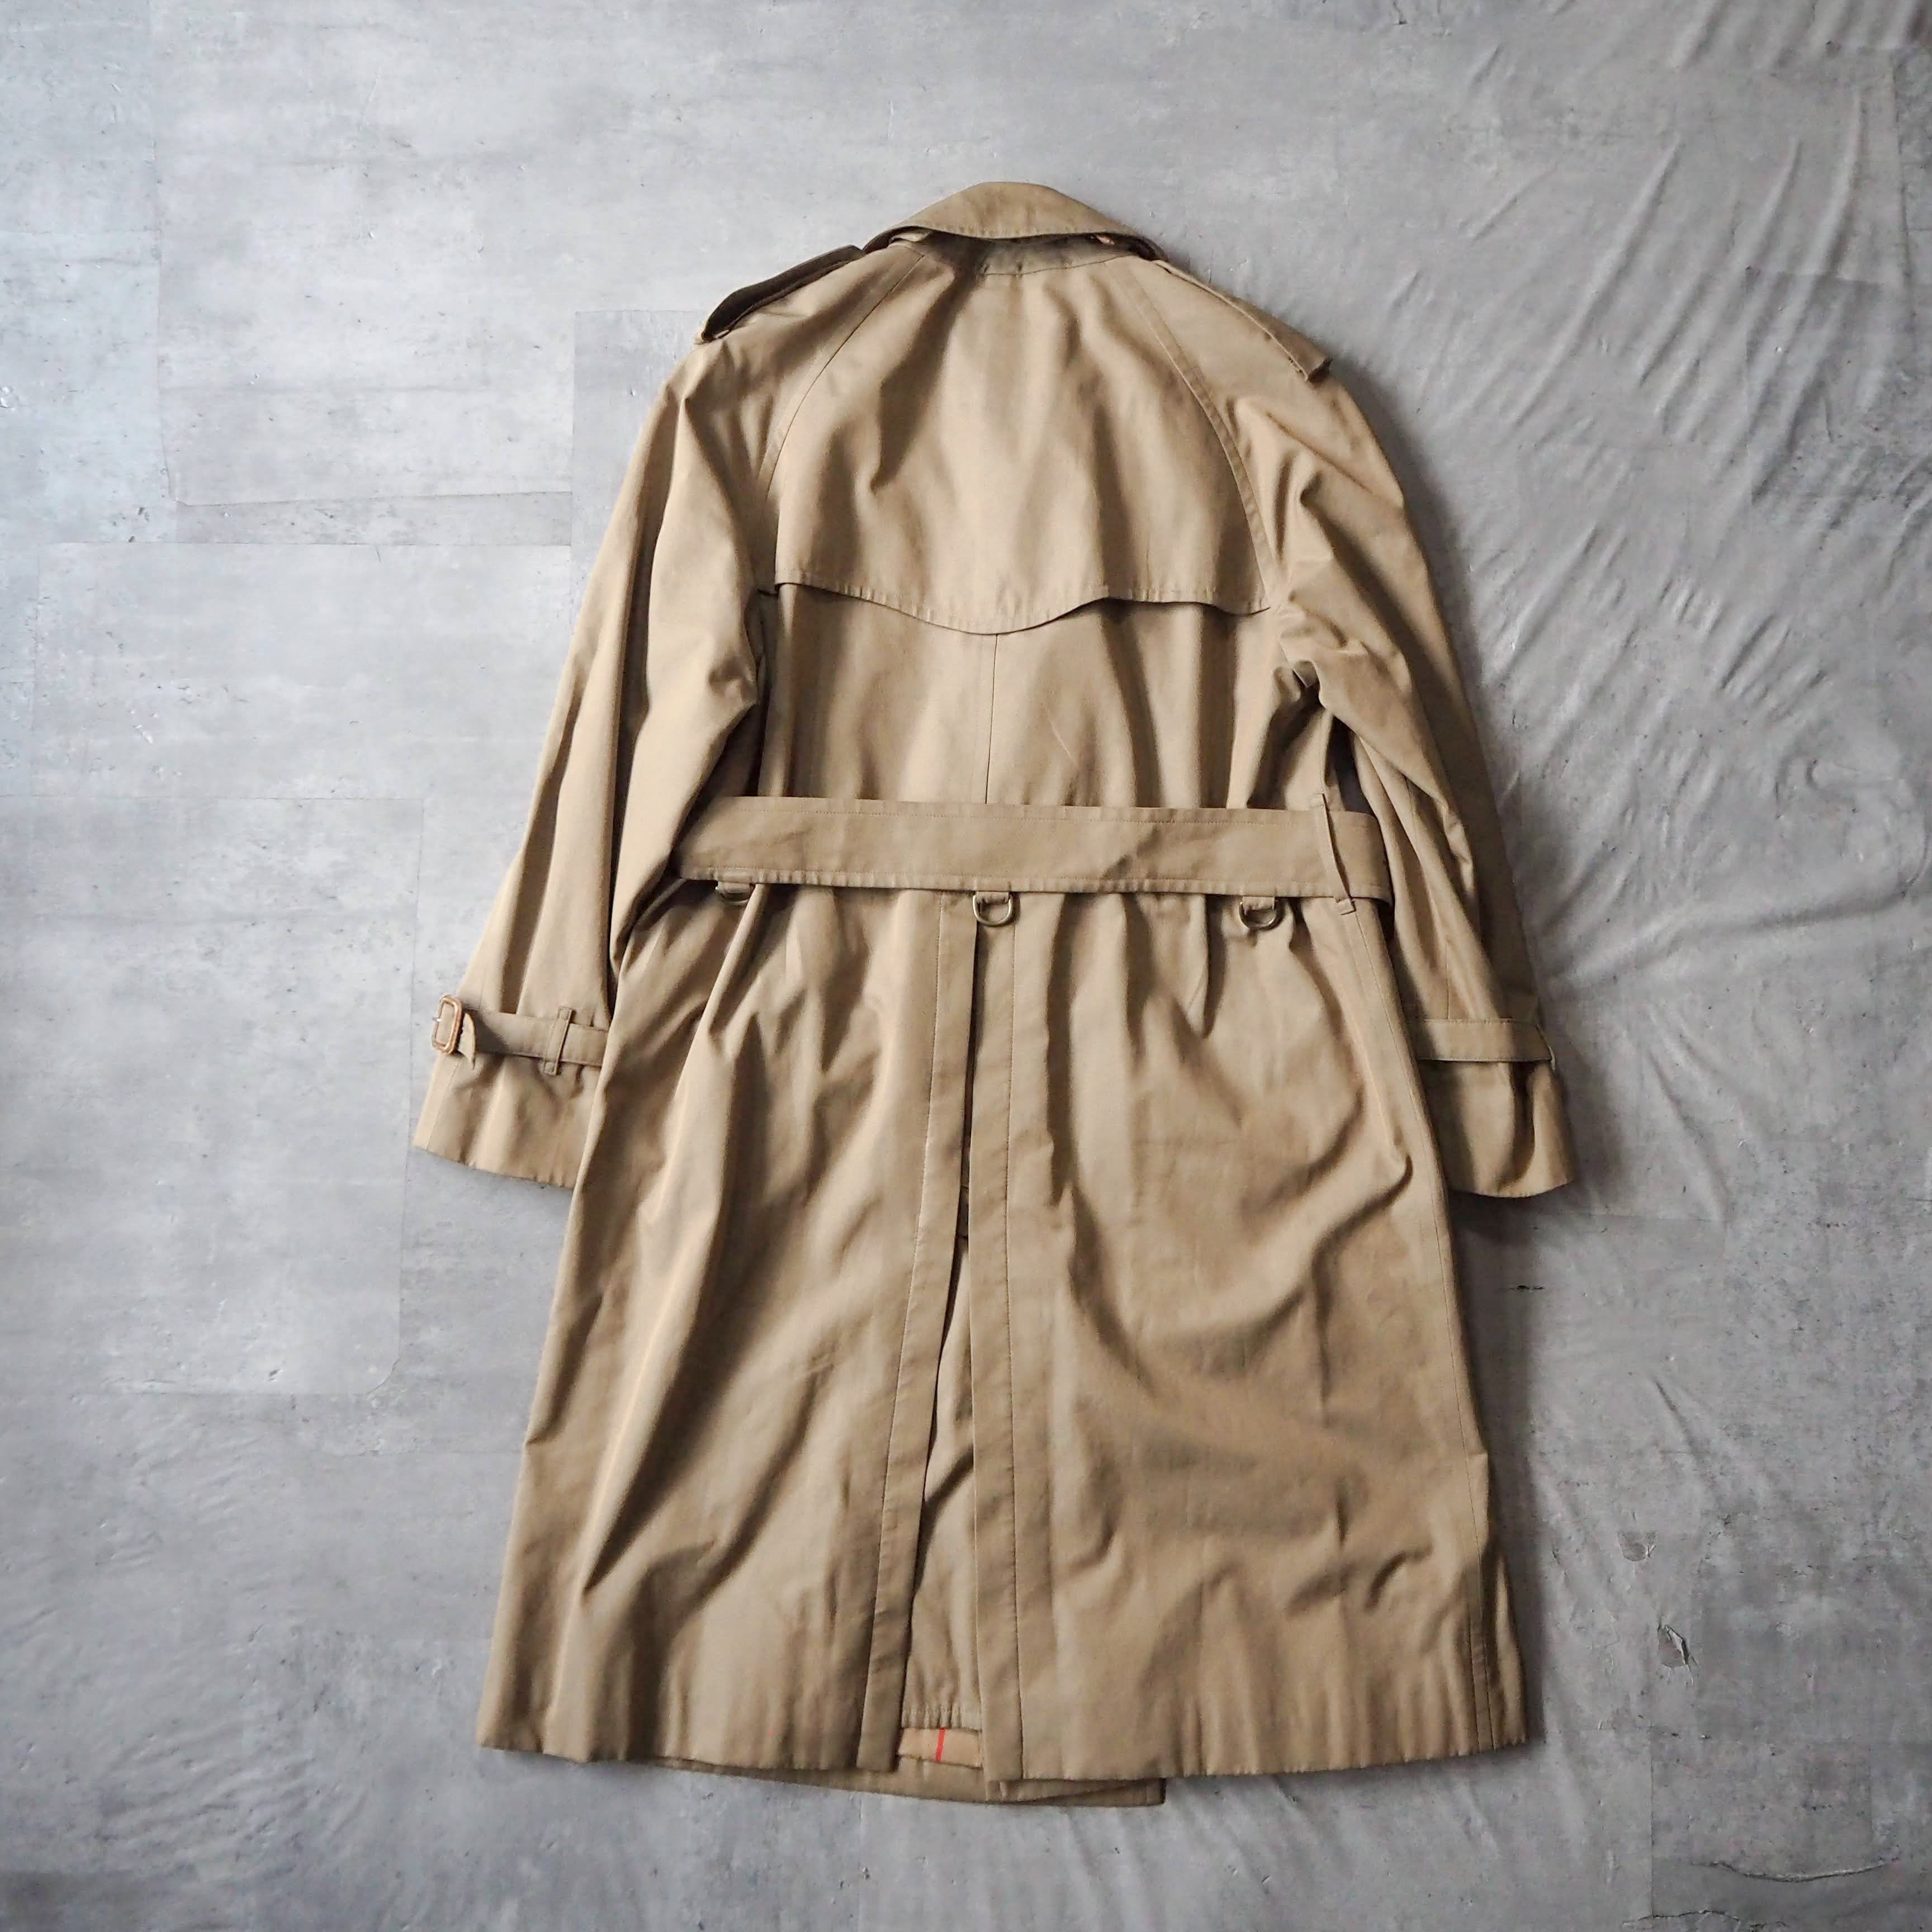 70s-80s “BURBERRYS” trench coat made in England 70年代 80 